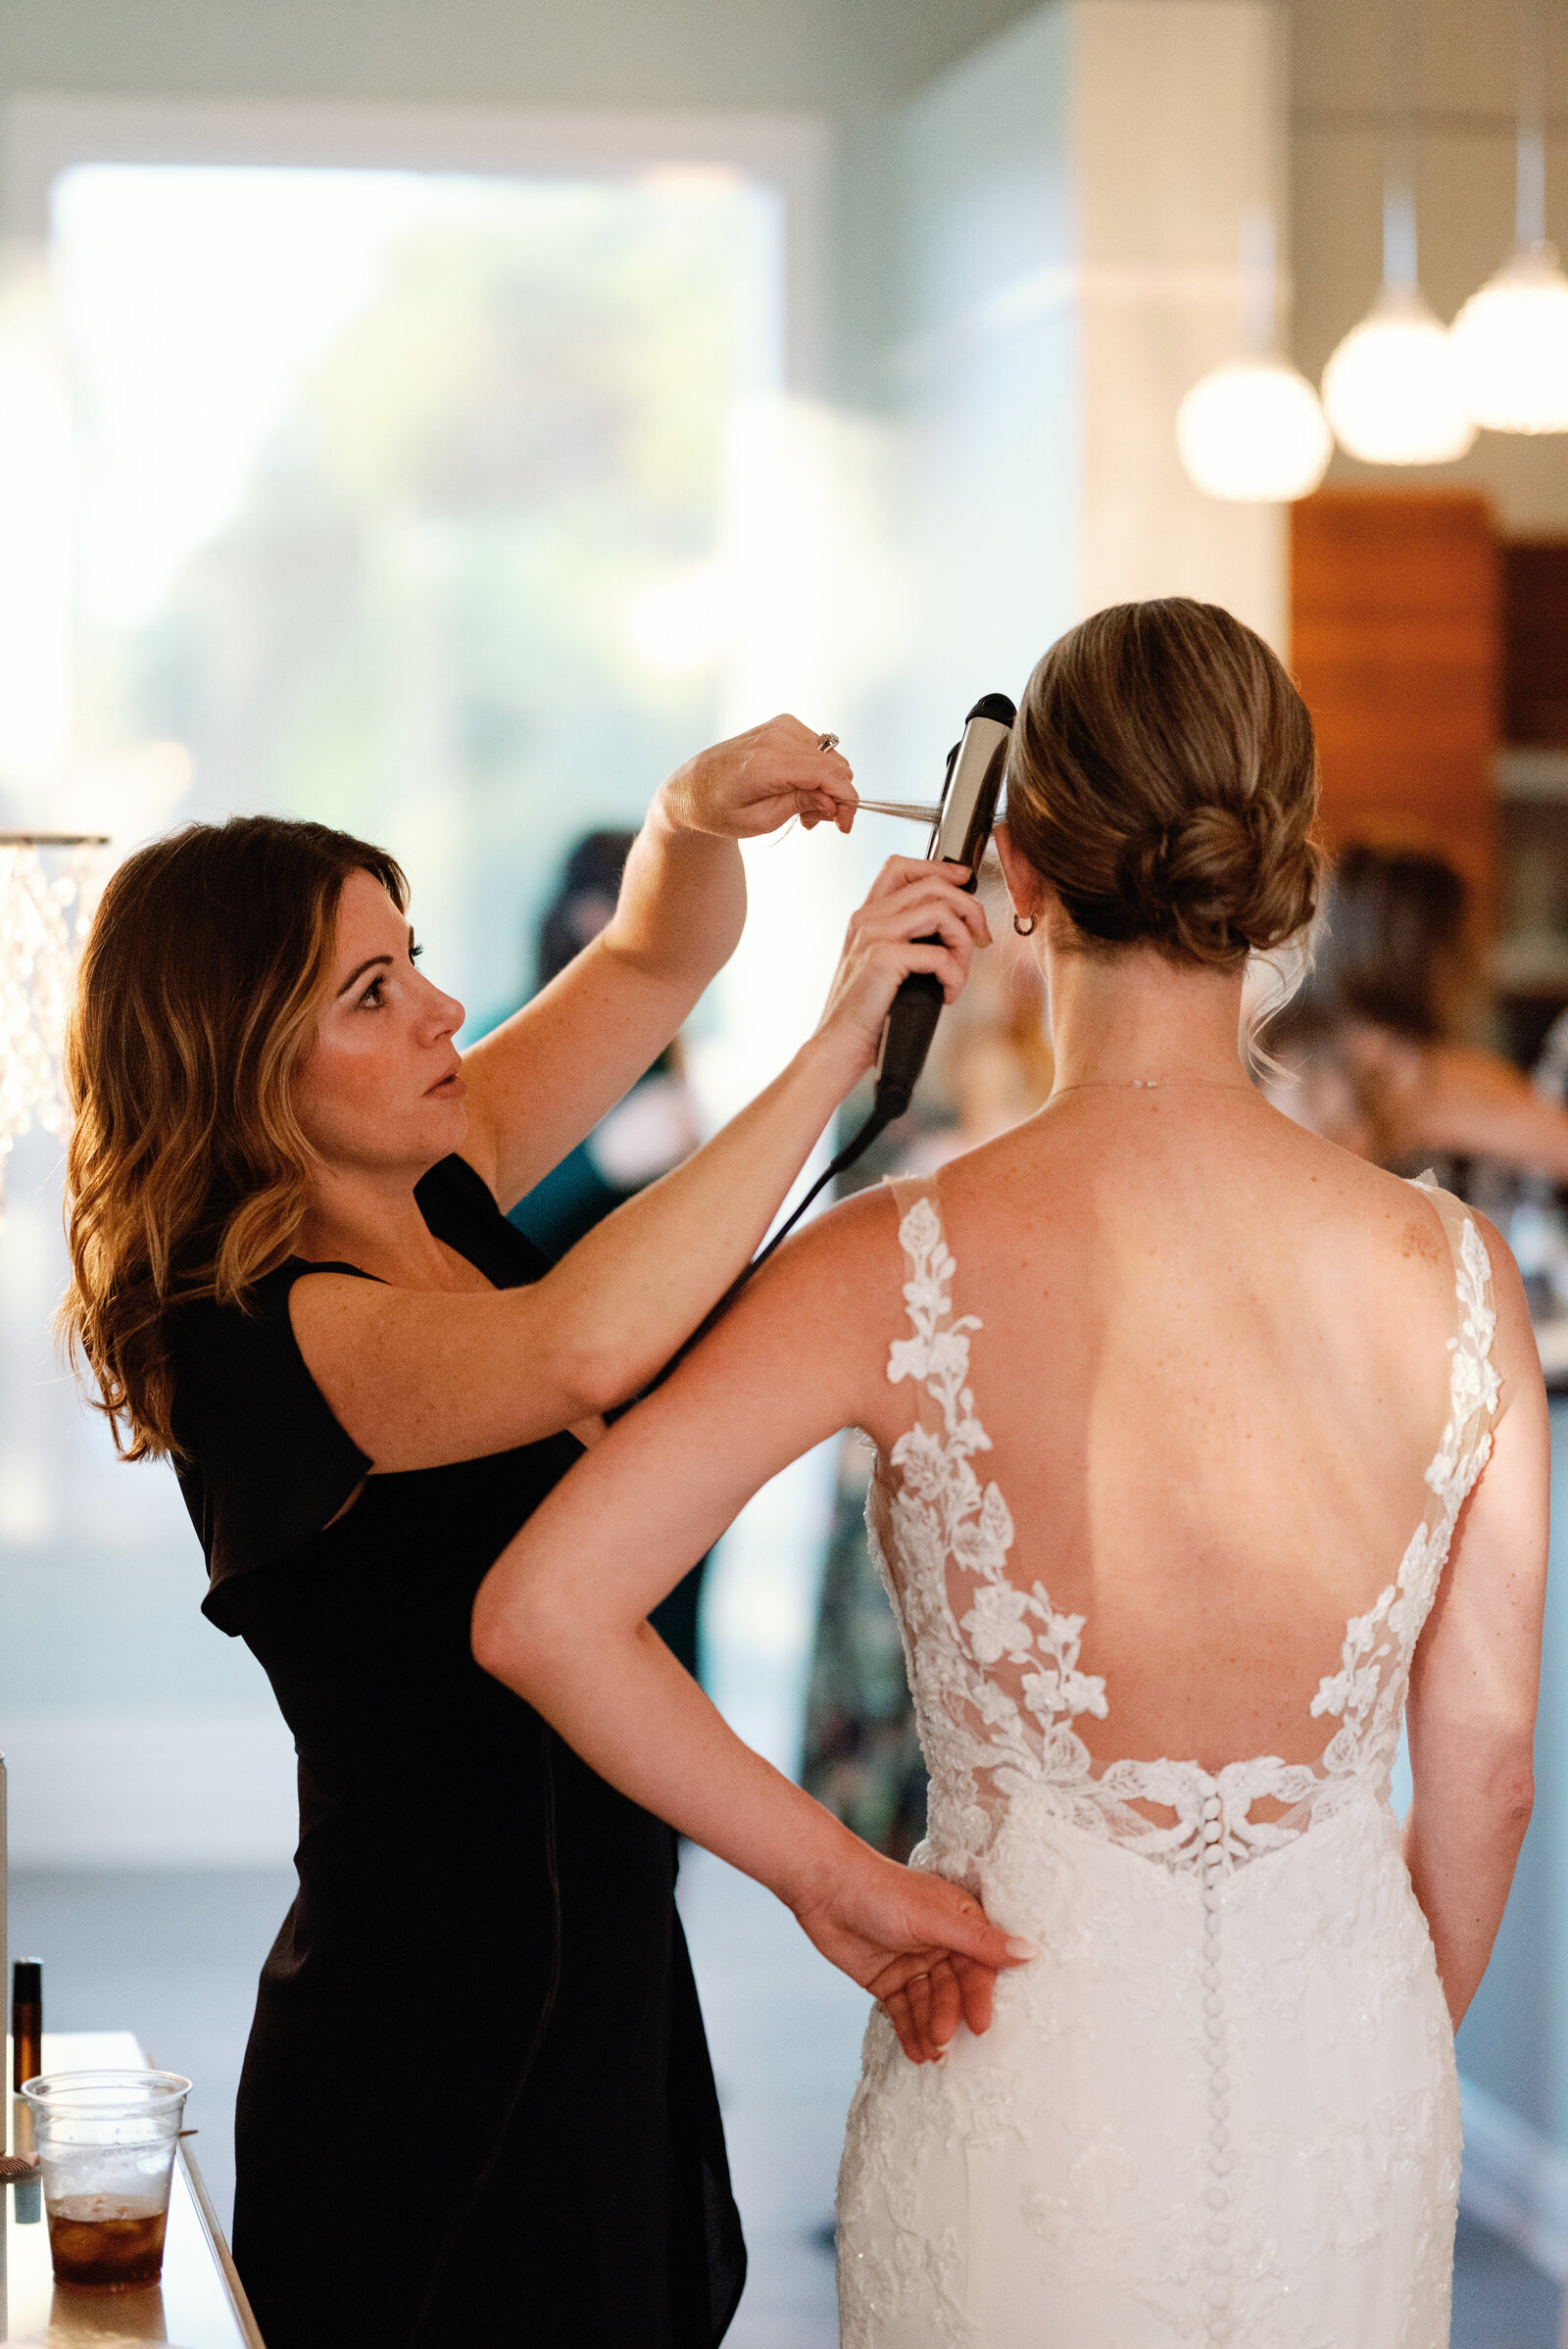 bride getting her hair touched up before the wedding ceremony begins